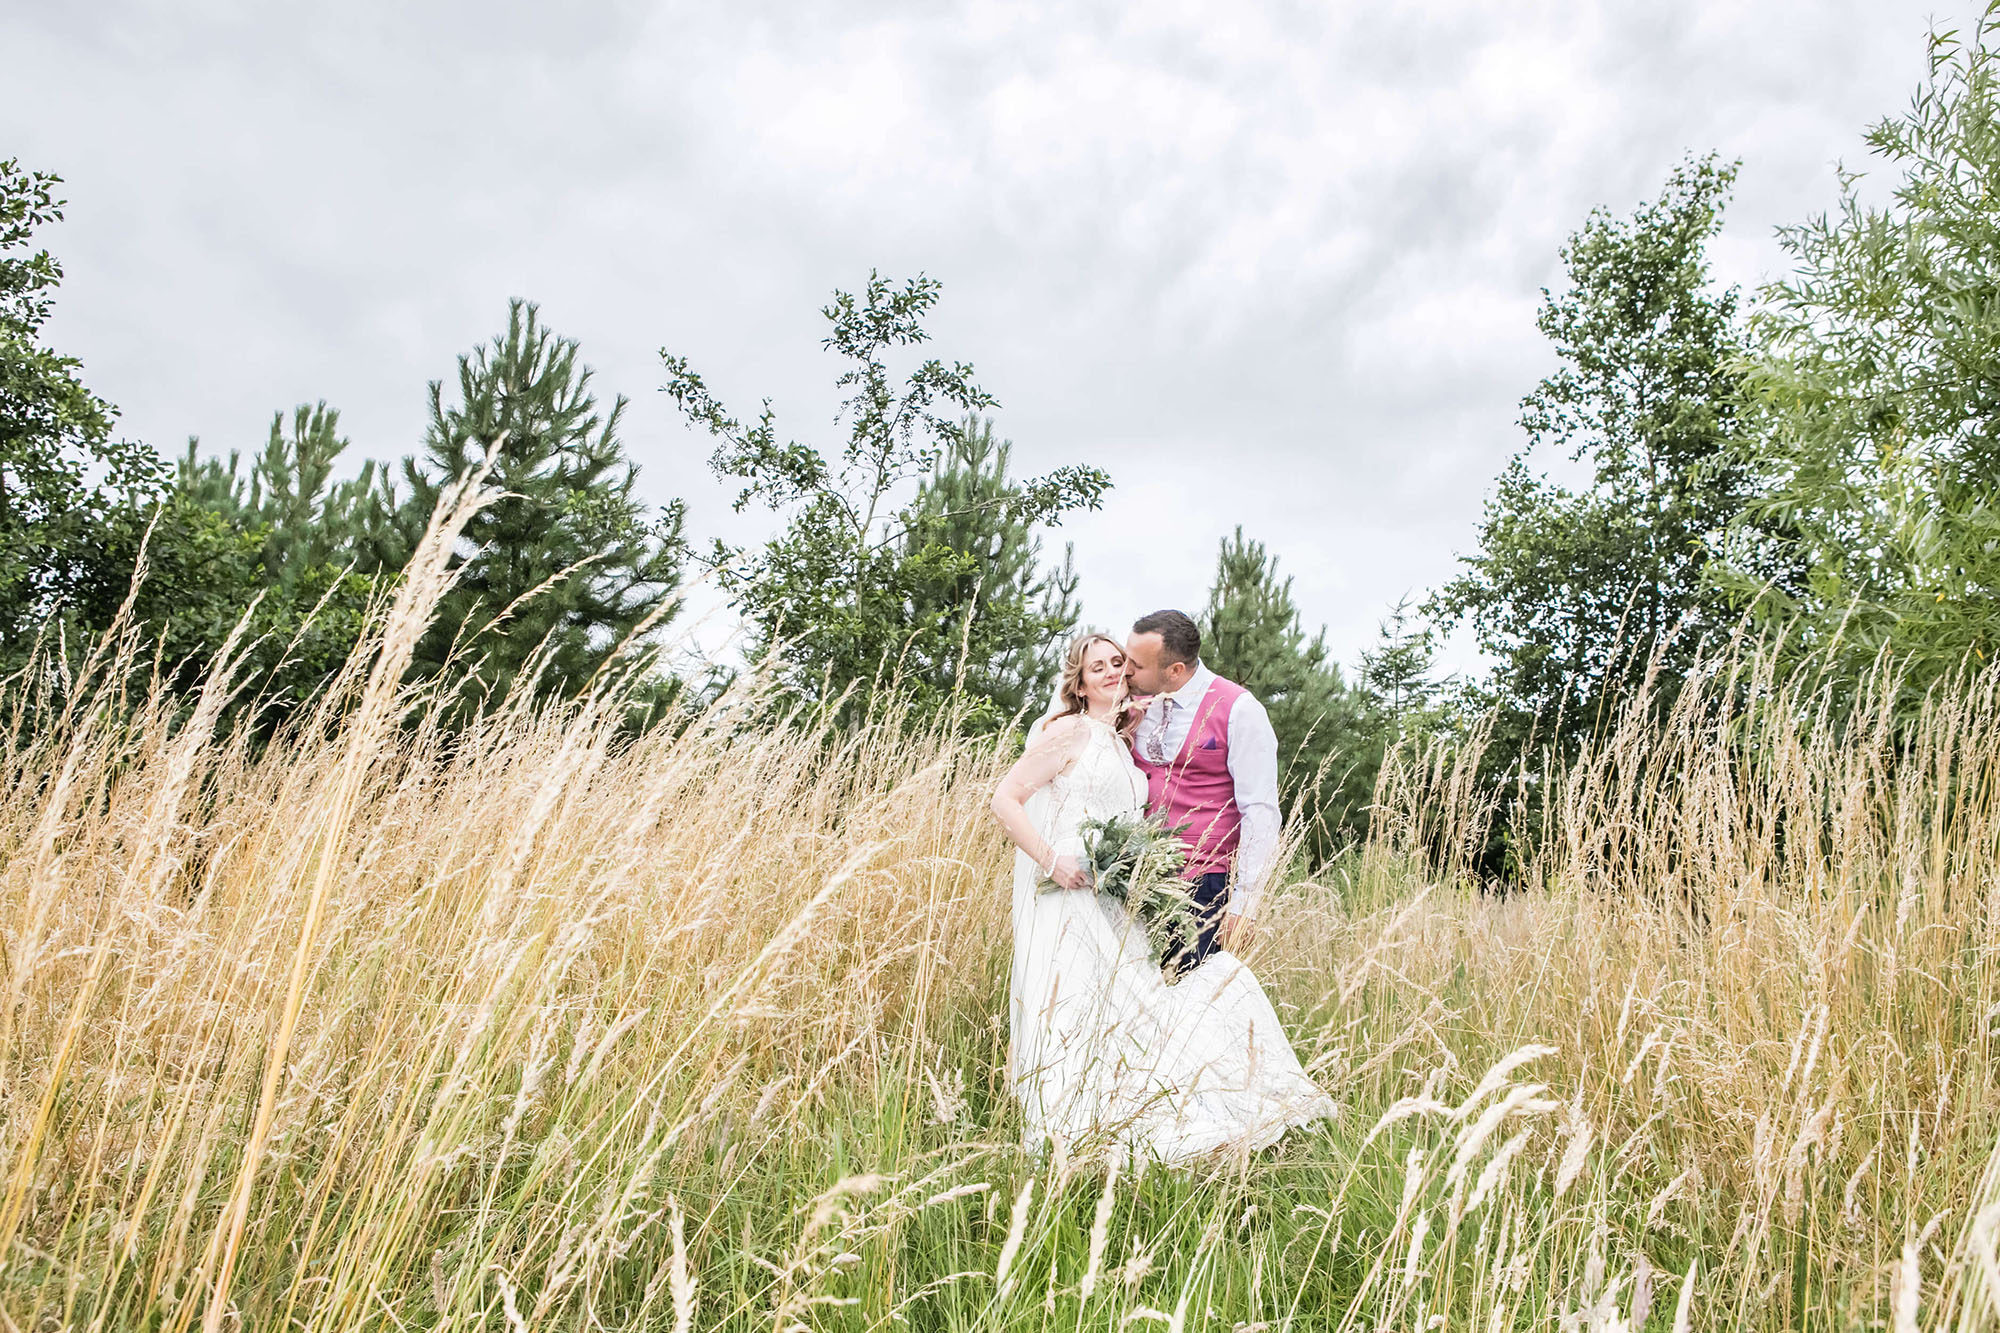 A bride and groom on their wedding day, in a field of long grass. The camera angle is low and there are green trees behind them. By Erika Tanith Photography